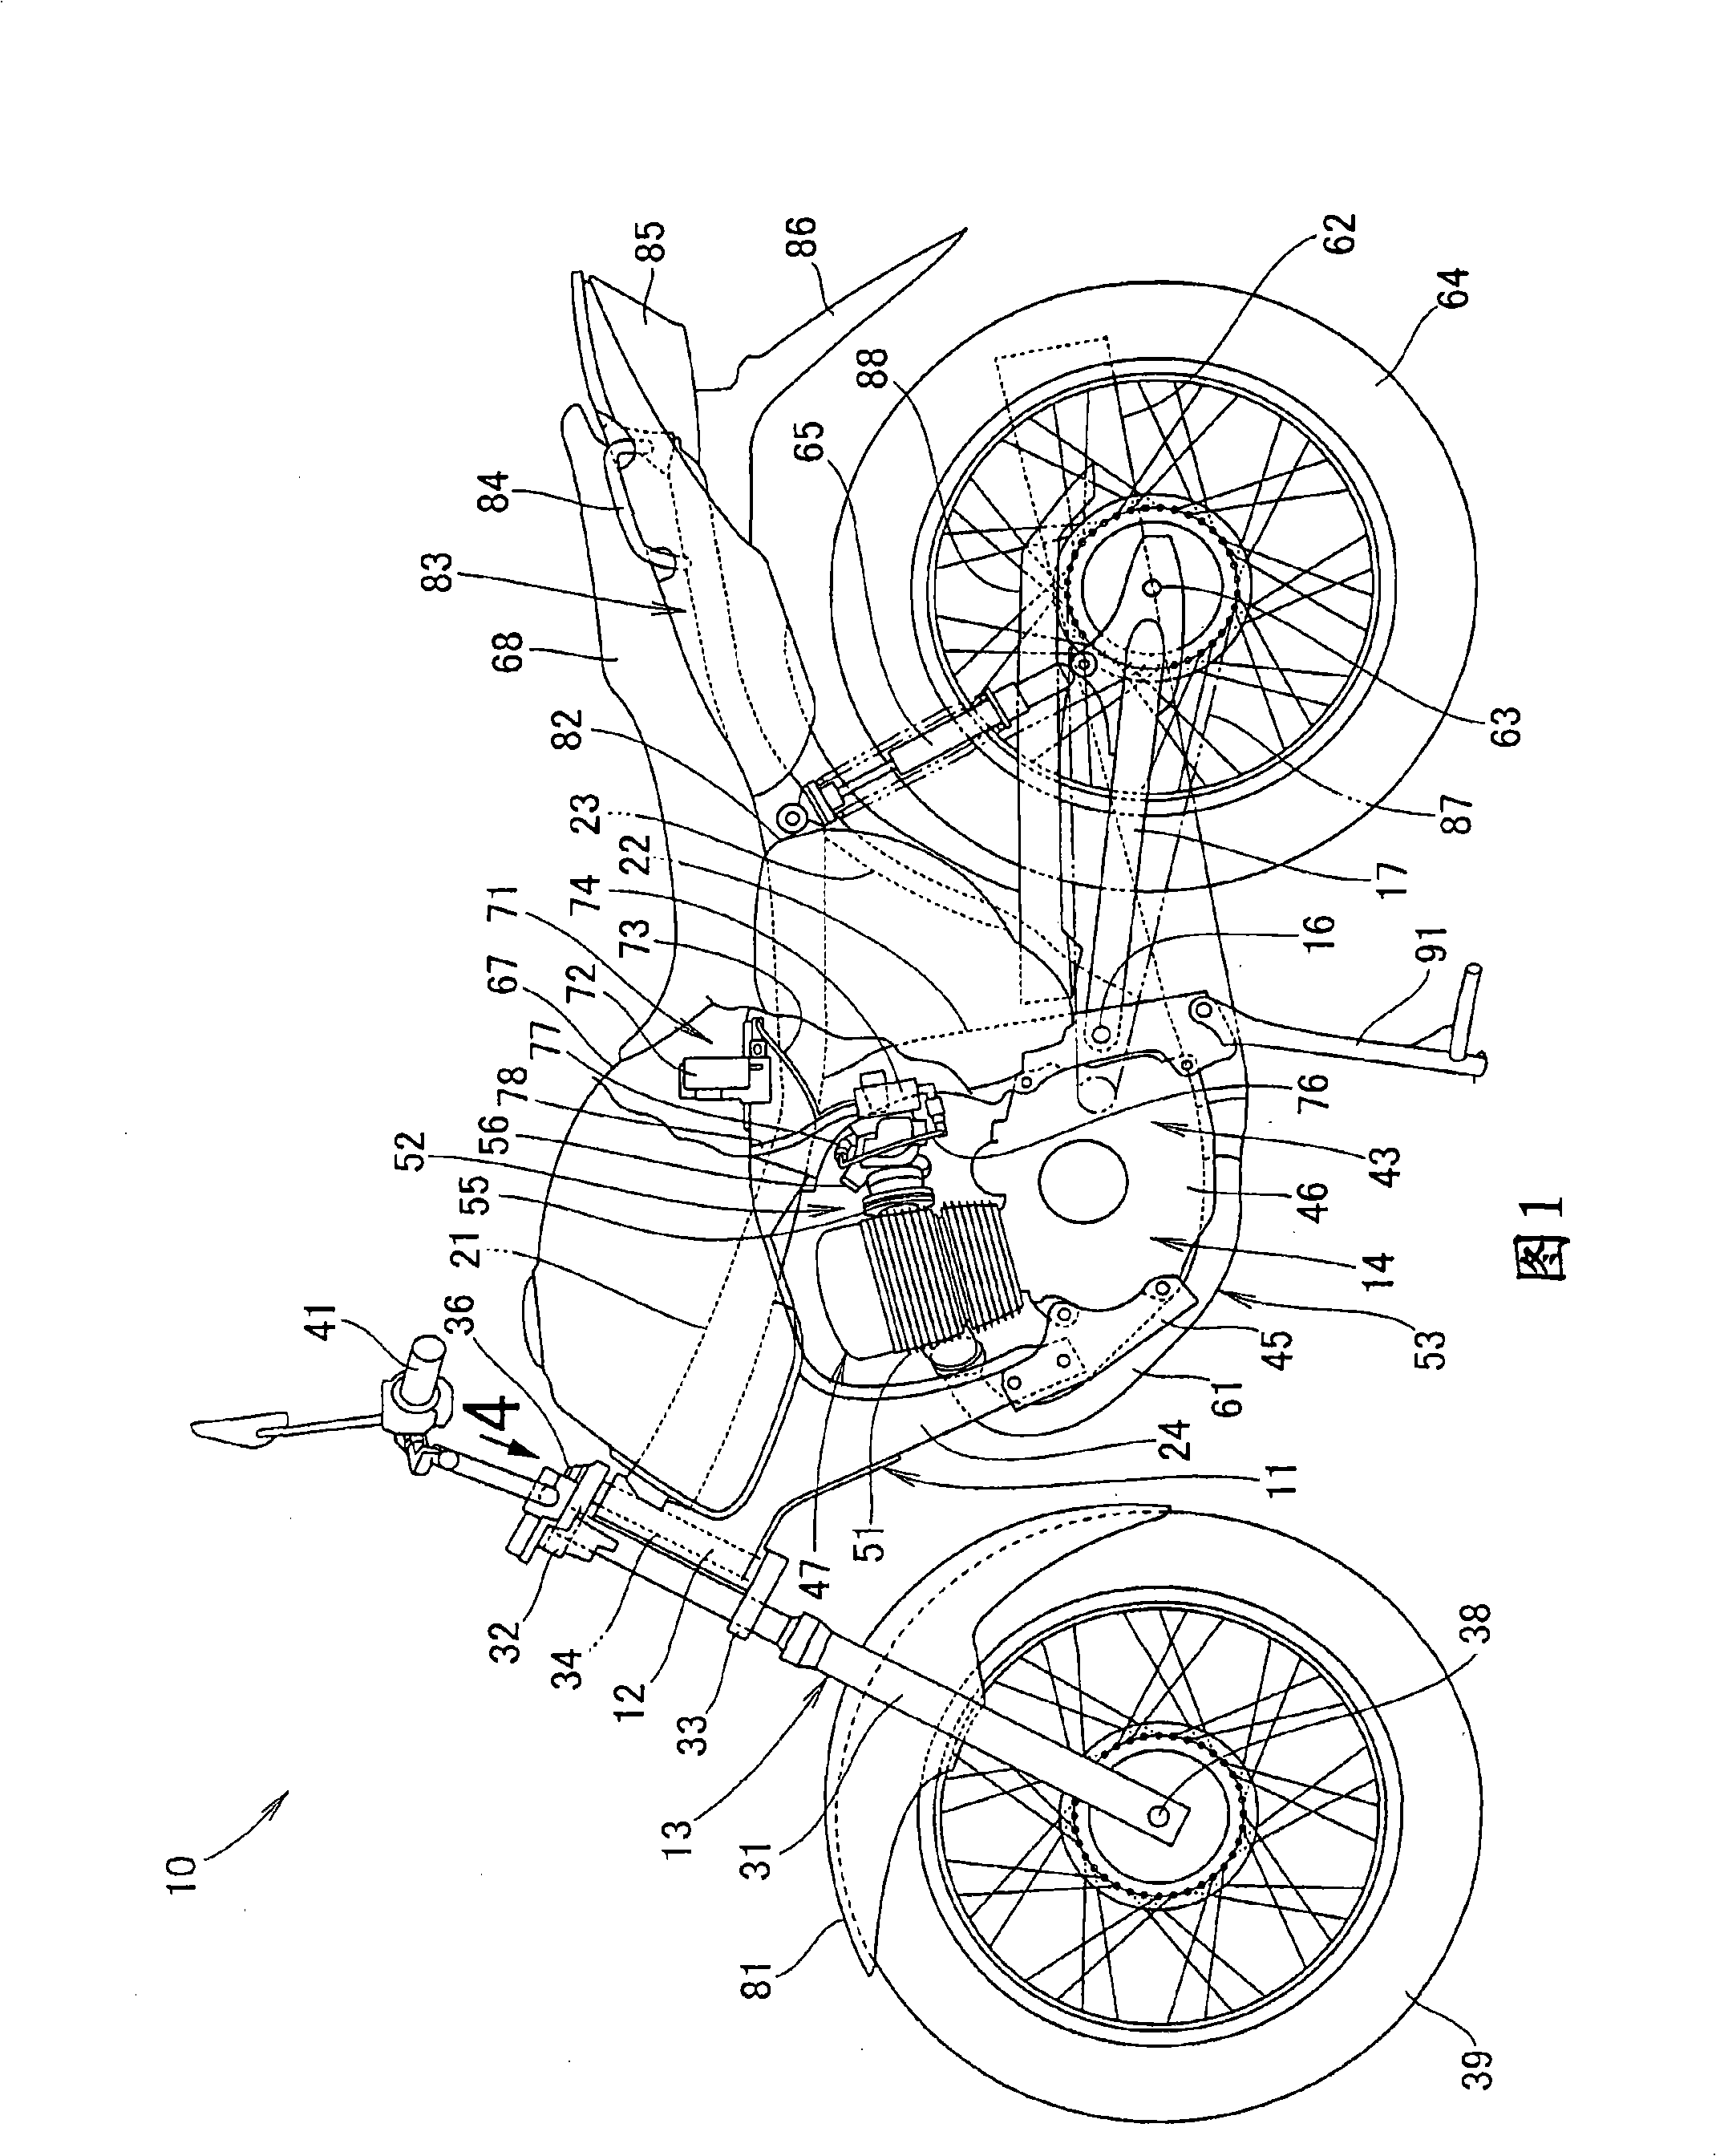 Fastening connection structure of vehicle steering rod